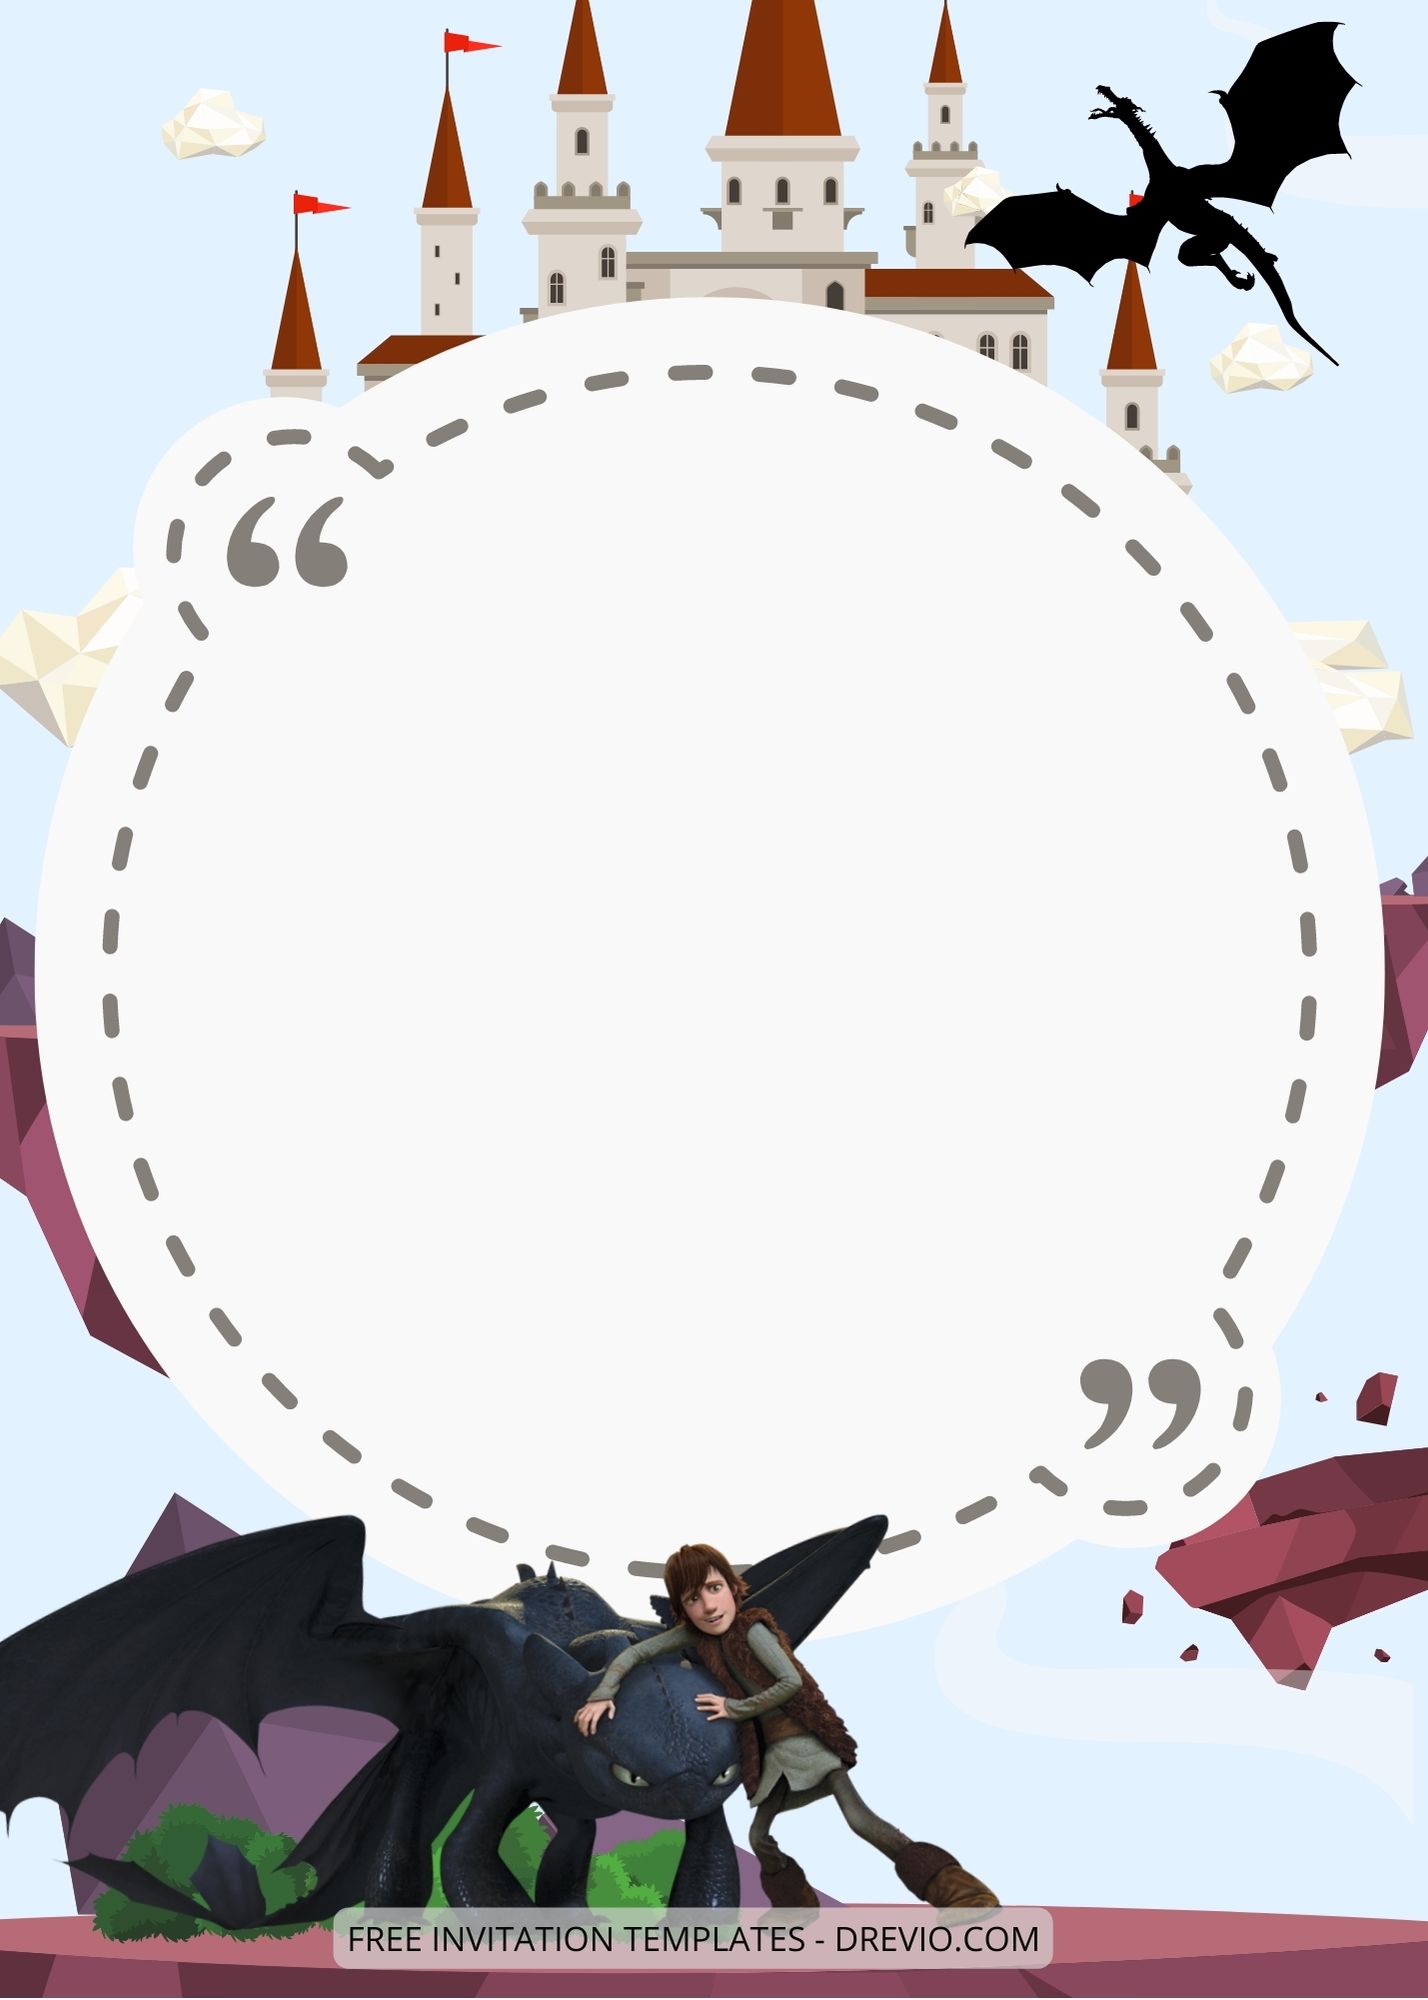 Blank How To Train Your Dragon Canva Birthday Invitation Templates Five